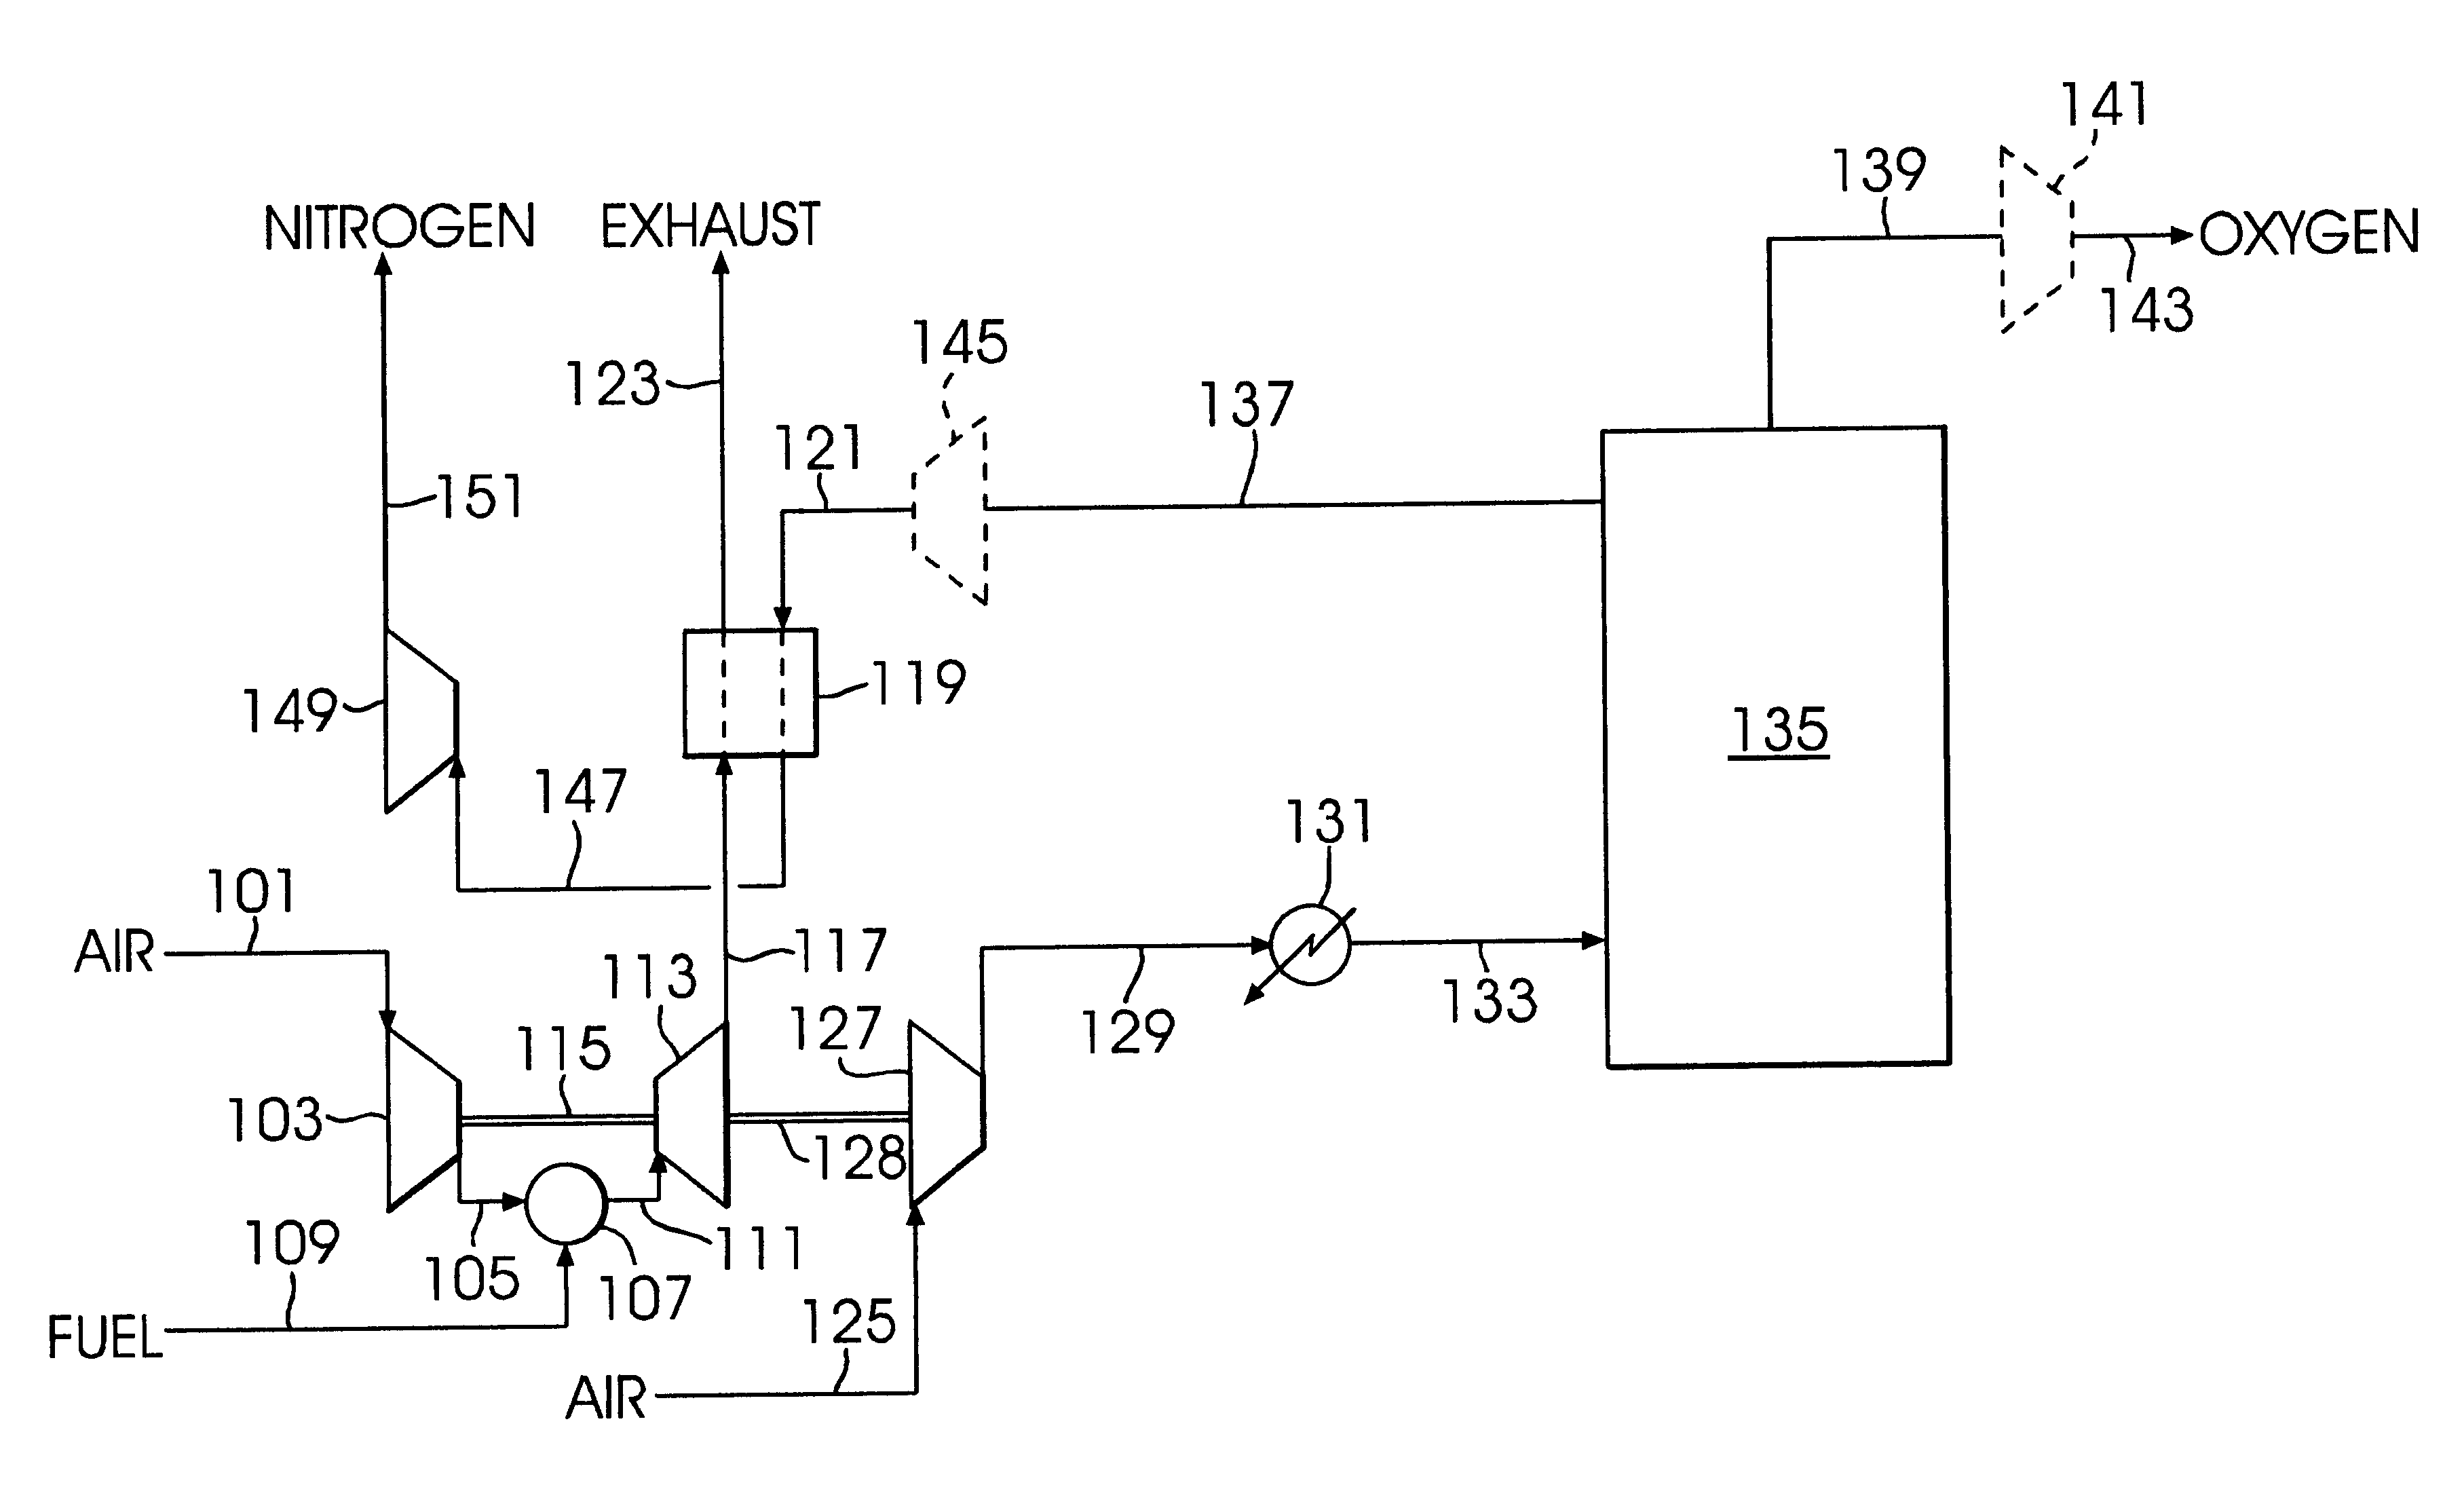 Air separation process integrated with gas turbine combustion engine driver